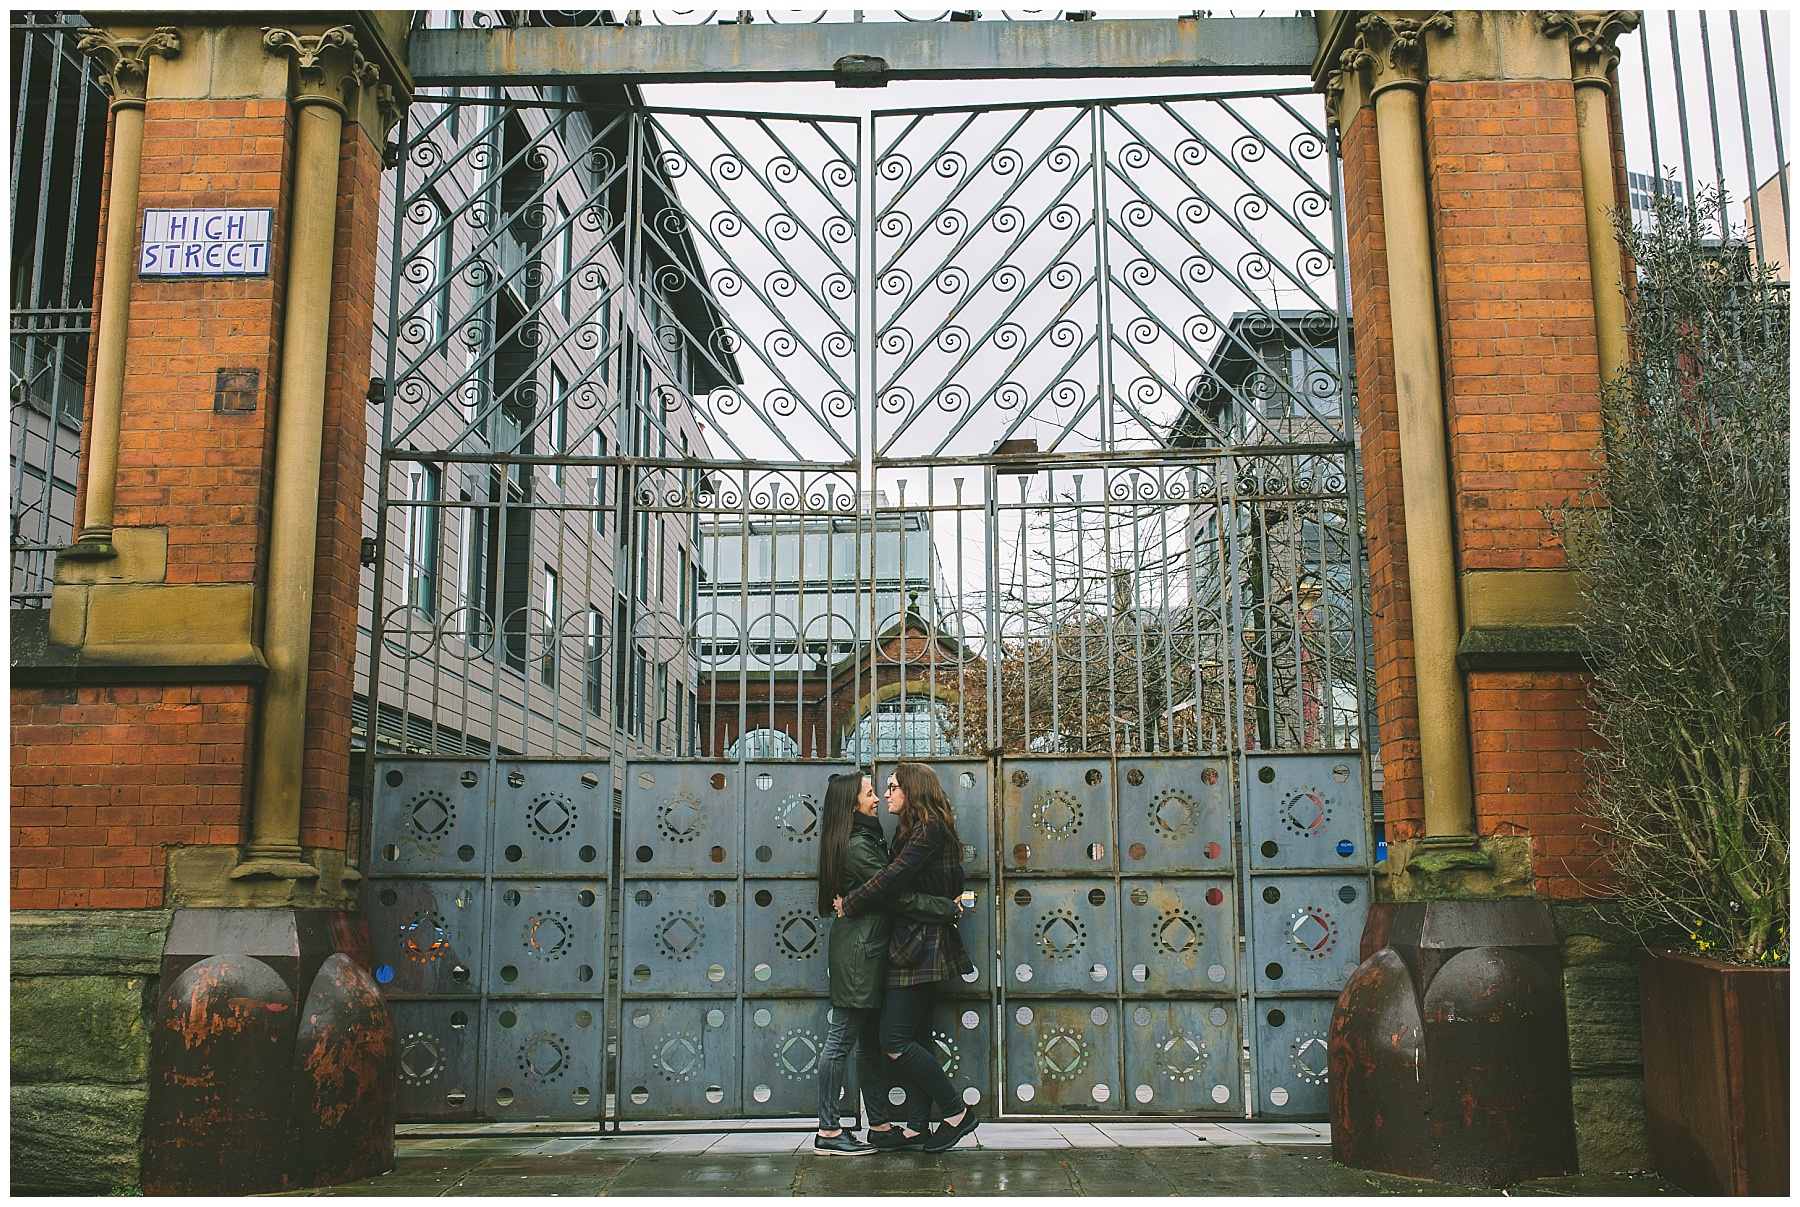 lesbian couple share a moment in front of the gates of the old Manchester fish markets